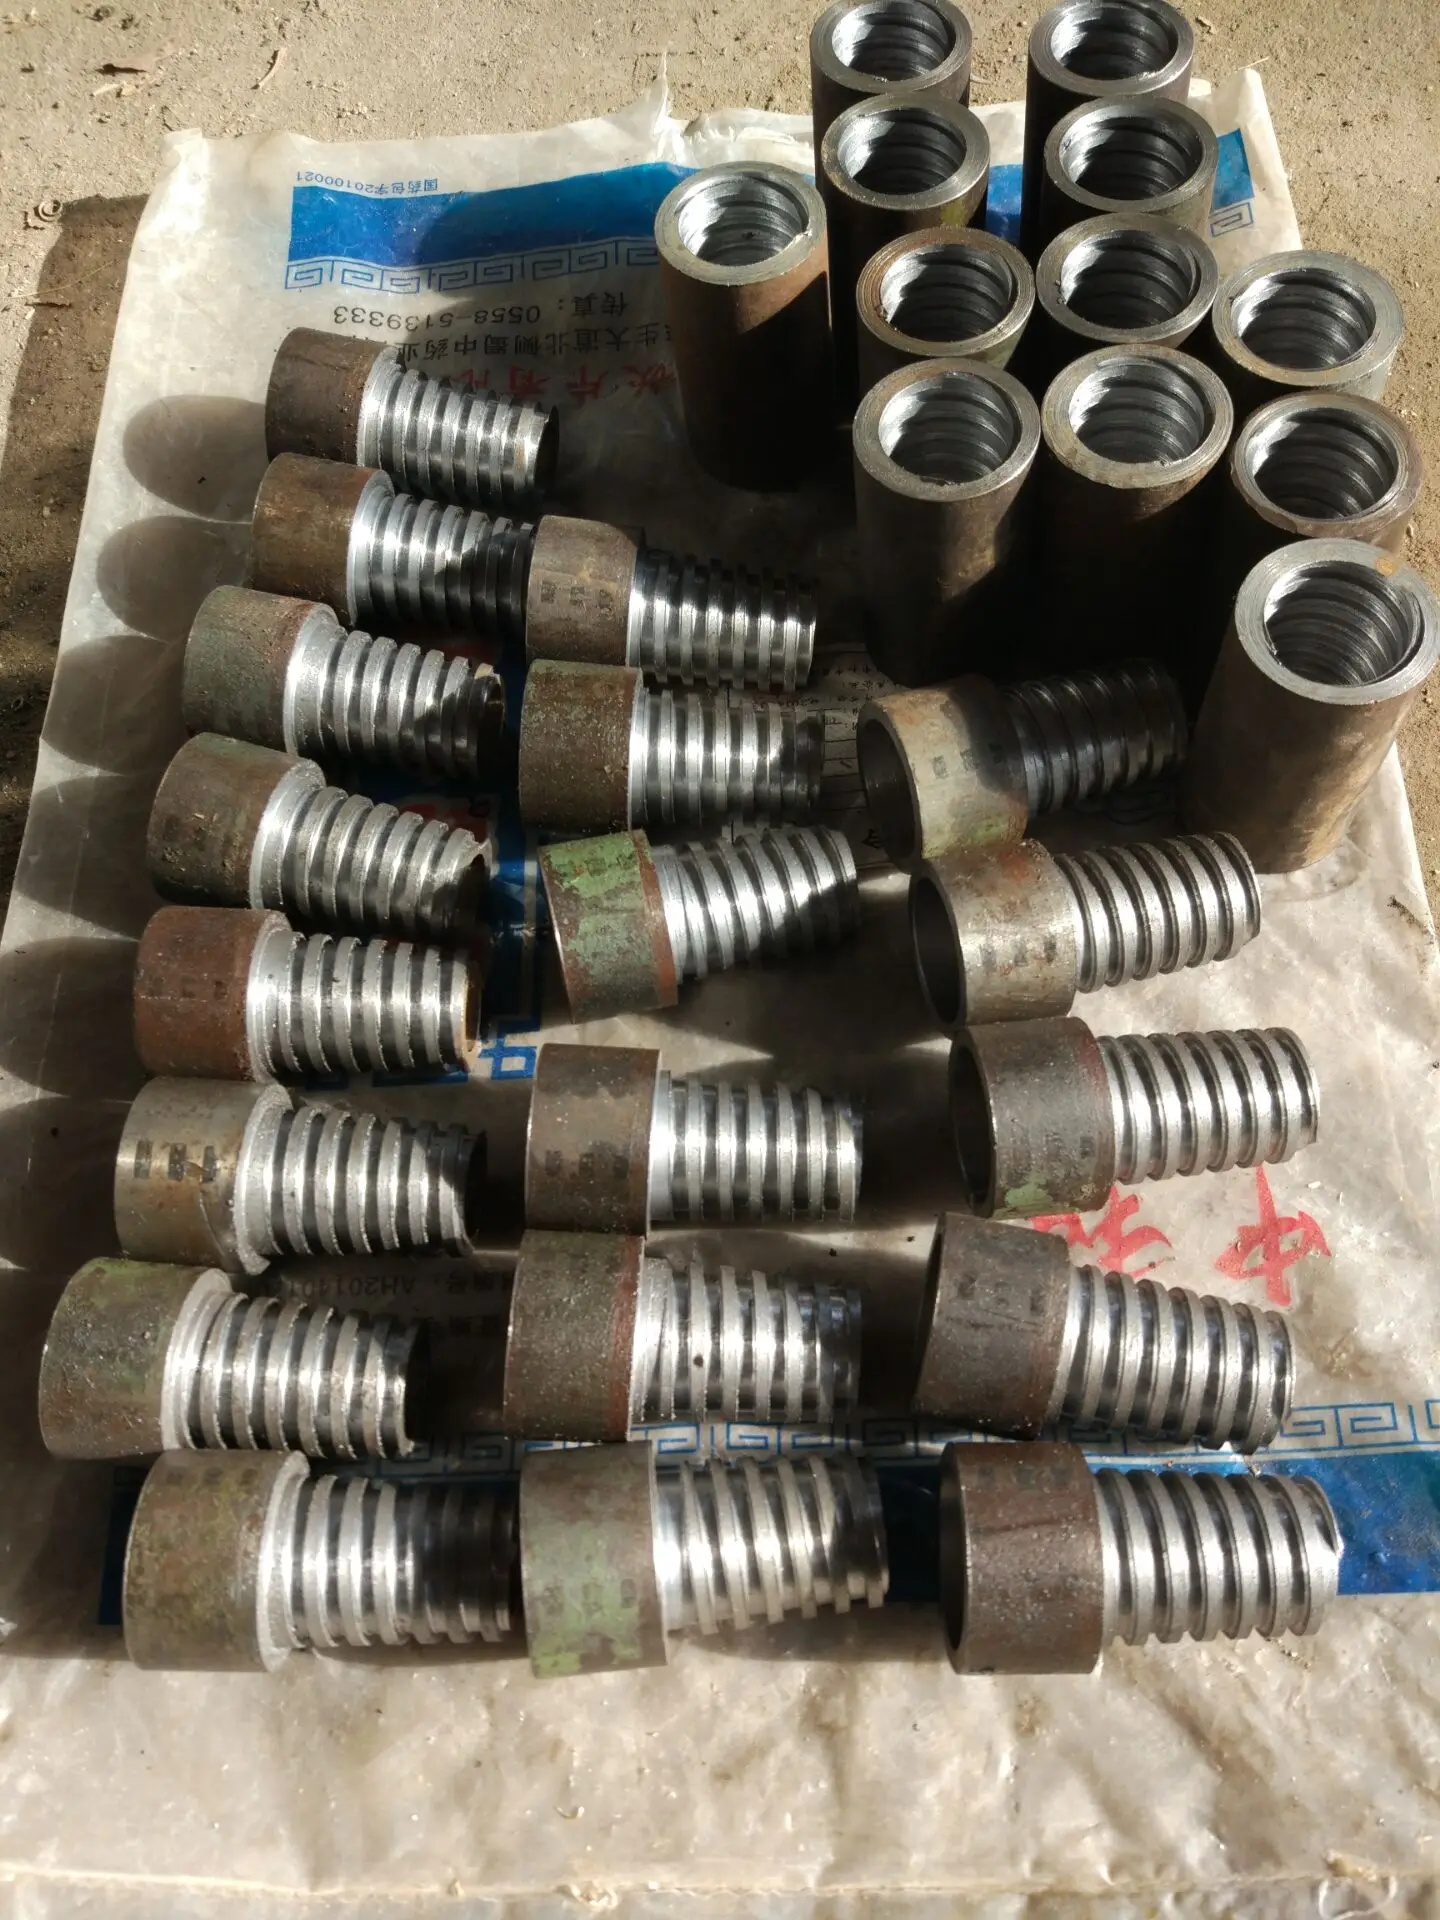 Water well Drilling rig accessories/Geological Drilling machine/Drill pipe joints,rhinestone ejector pins,taper threaded joints